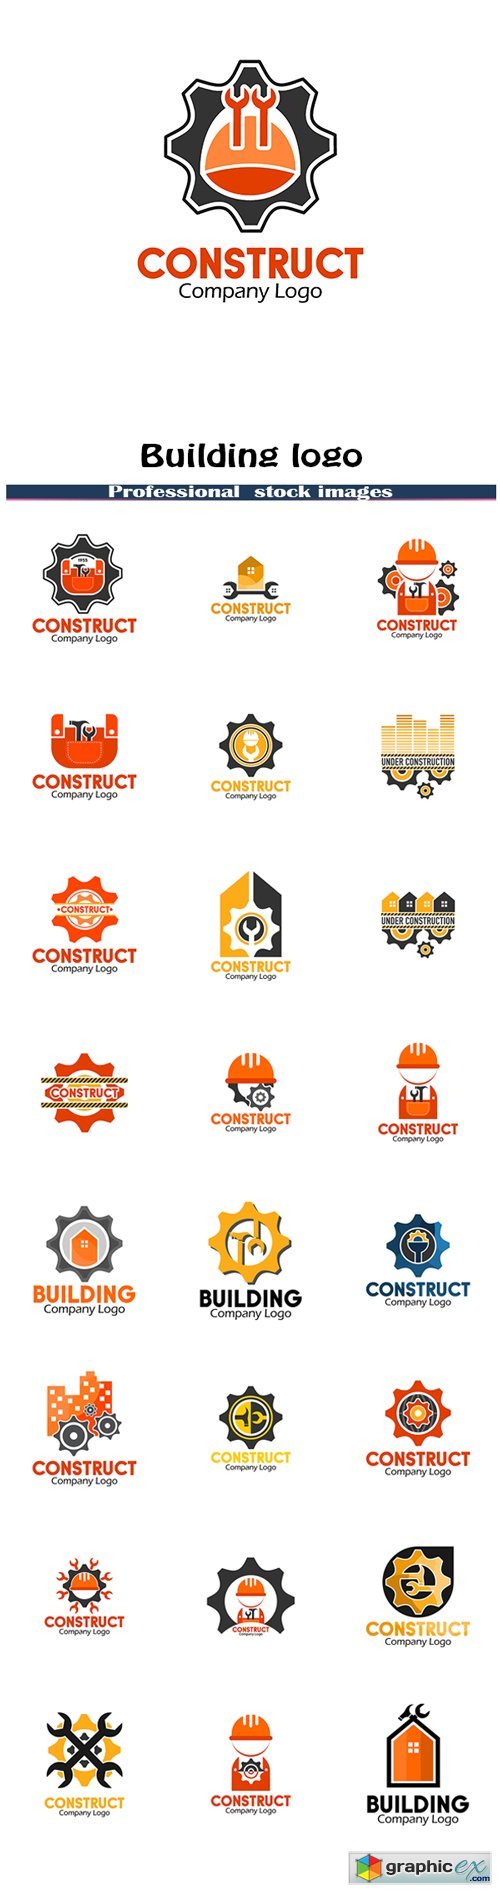 Building logo, construction working industry concept